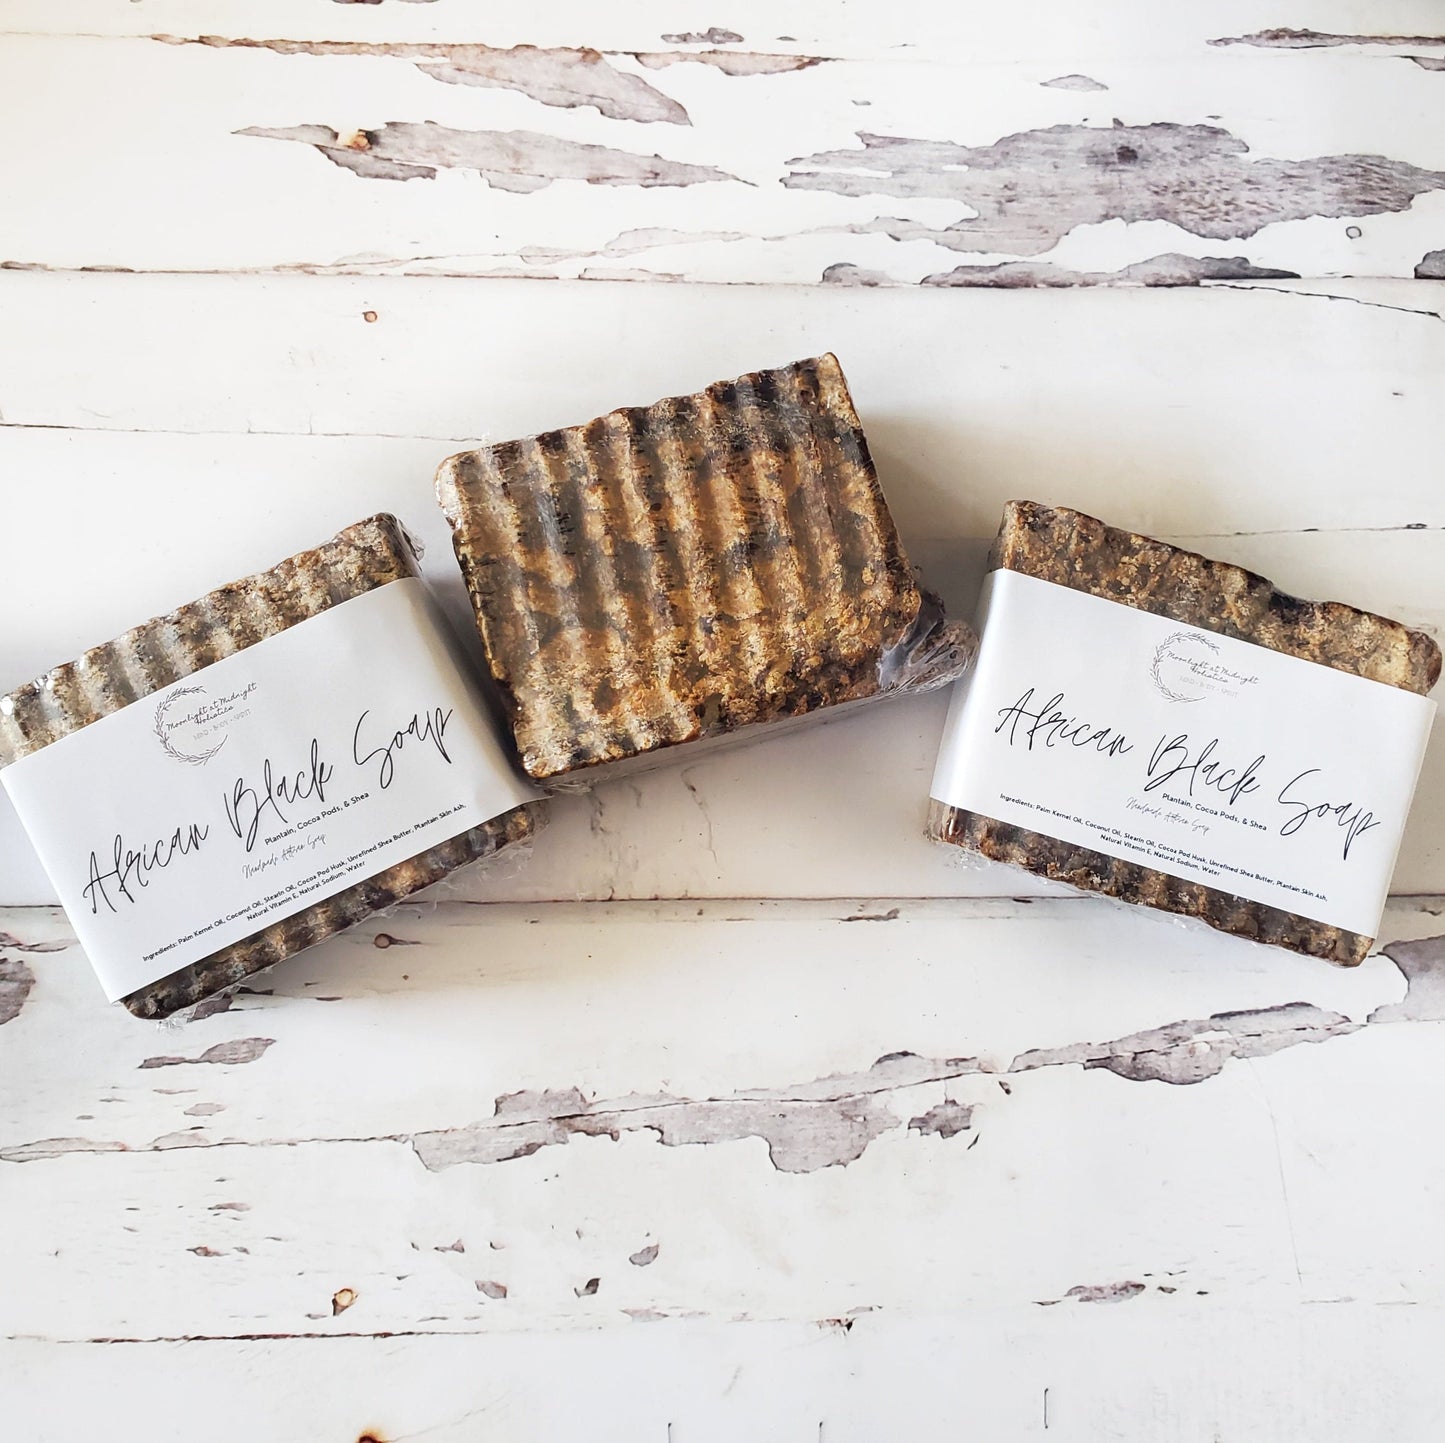 AFRICAN BLACK SOAP | 100% Authentic, Raw African Black Soap